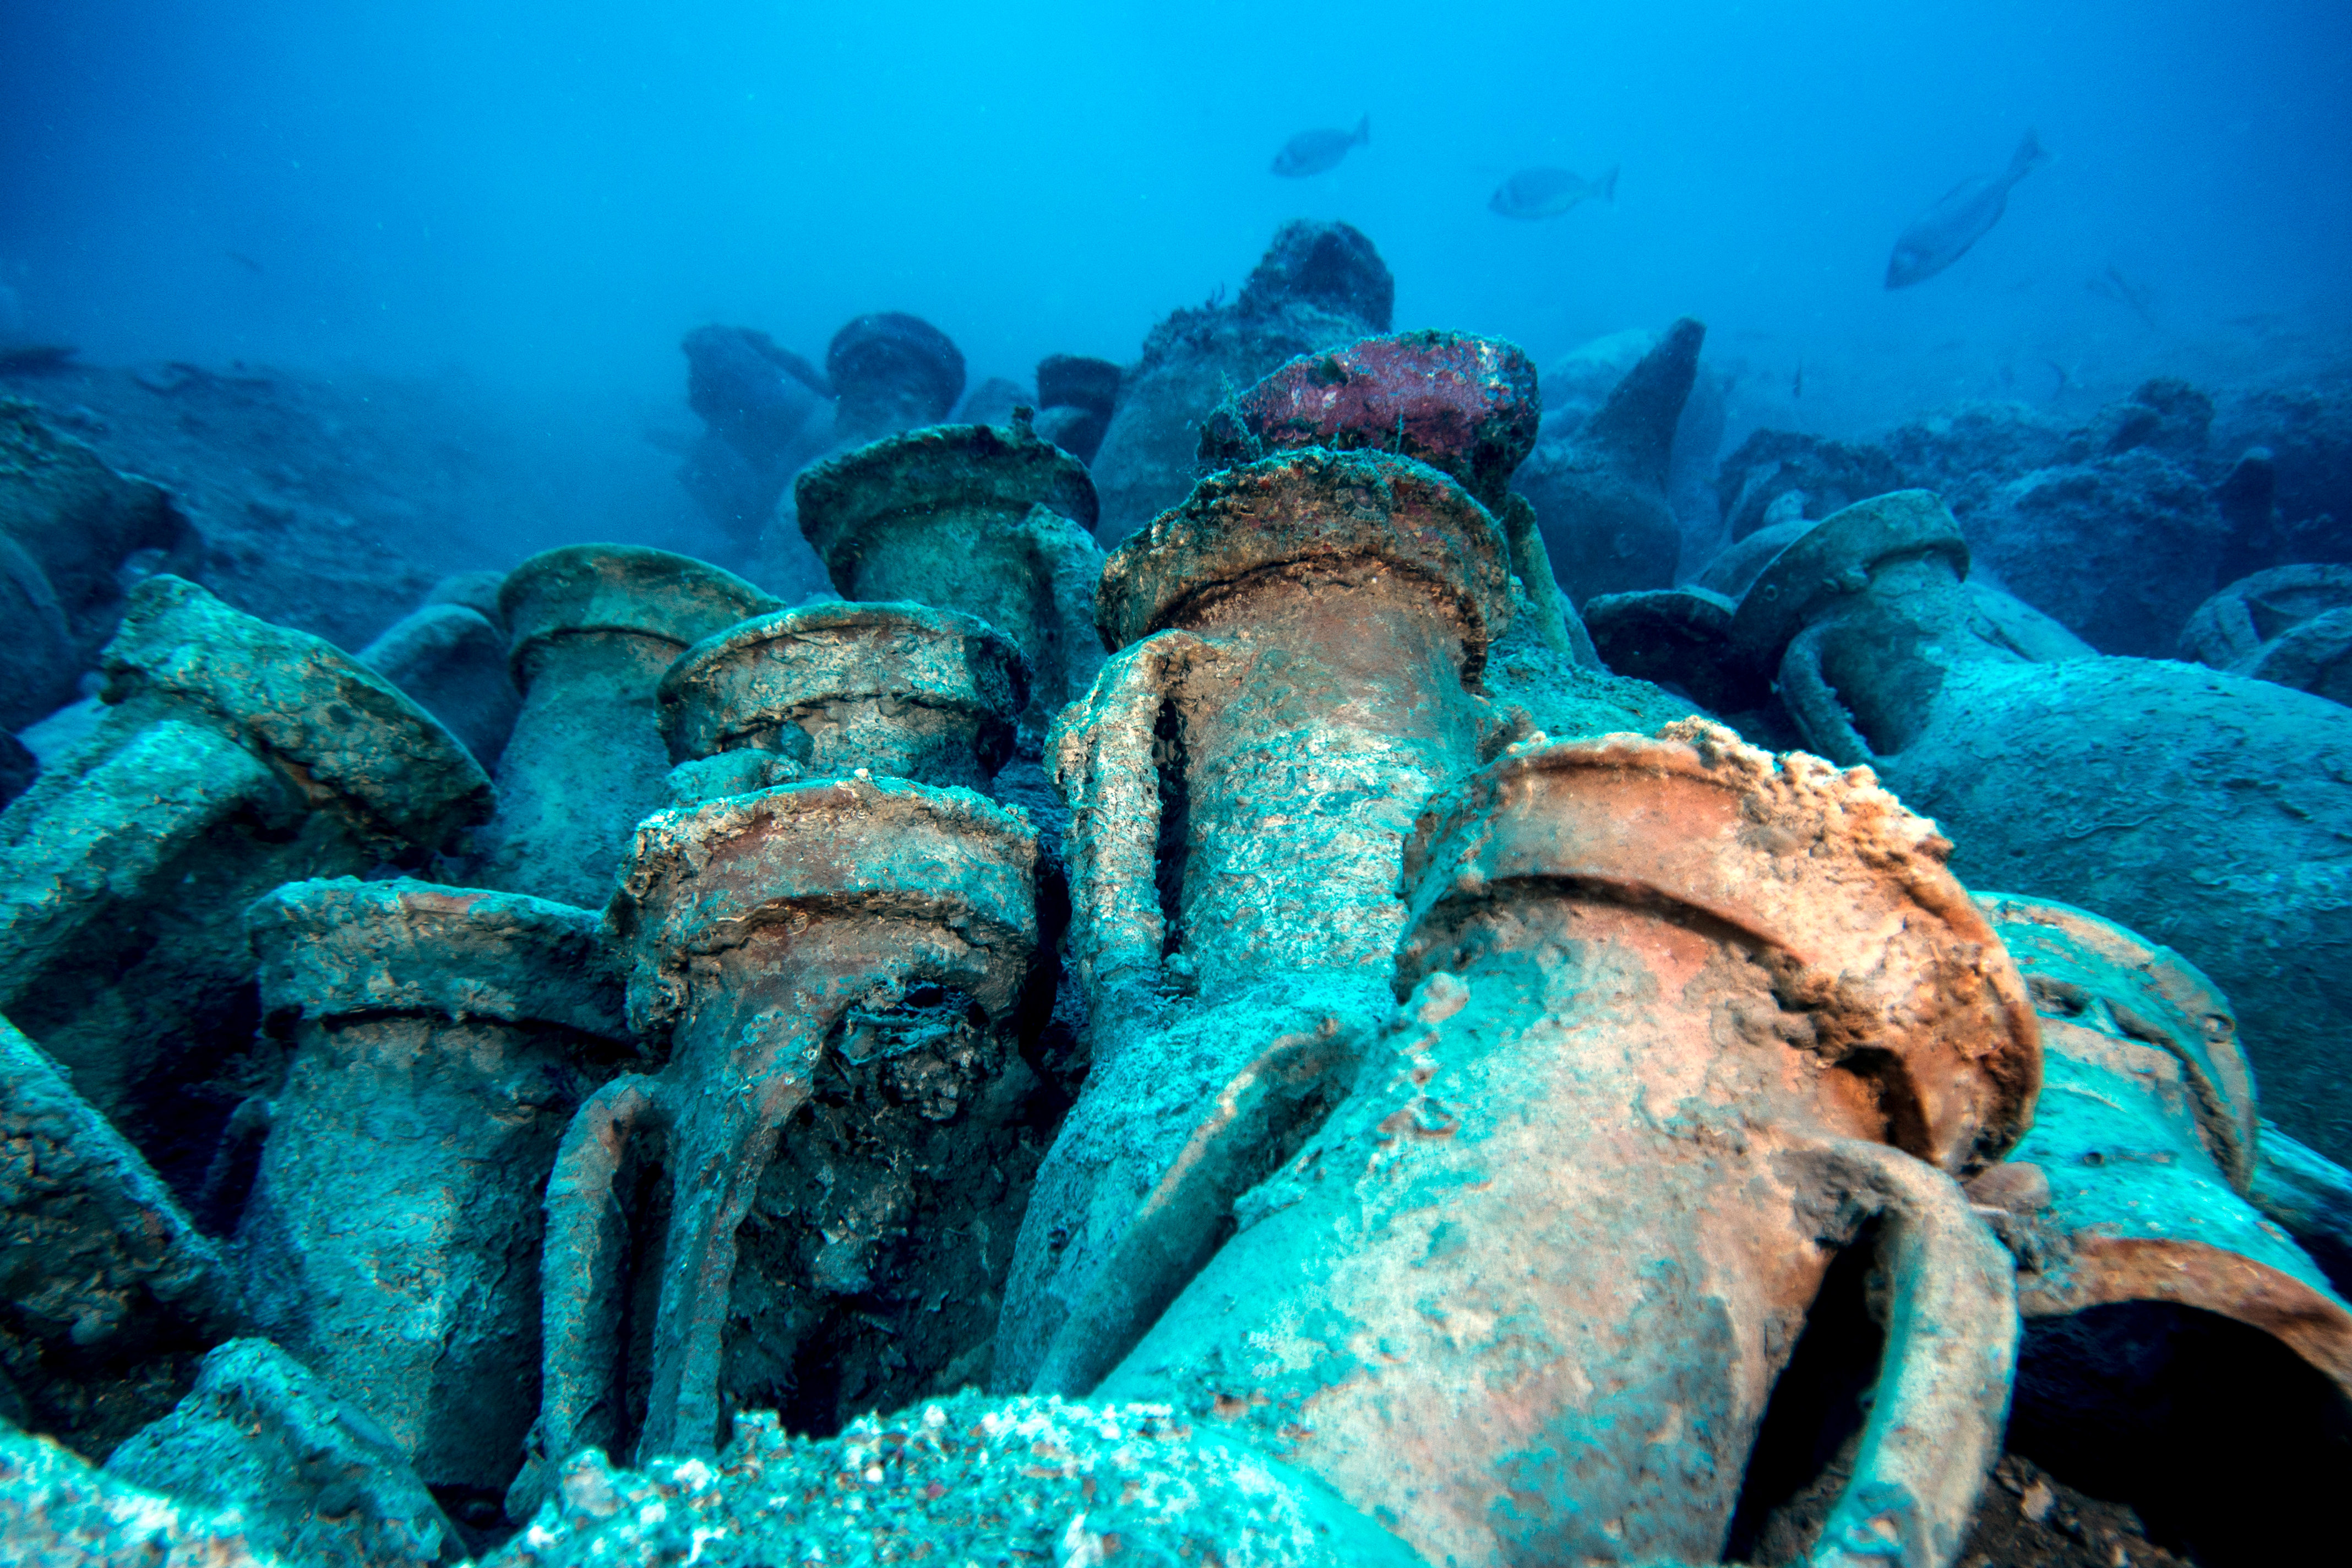 Some of the 135 amphora that archeologists unearthed at the wreck around the Formigues islands (March 20 2018, courtesy of CASC)